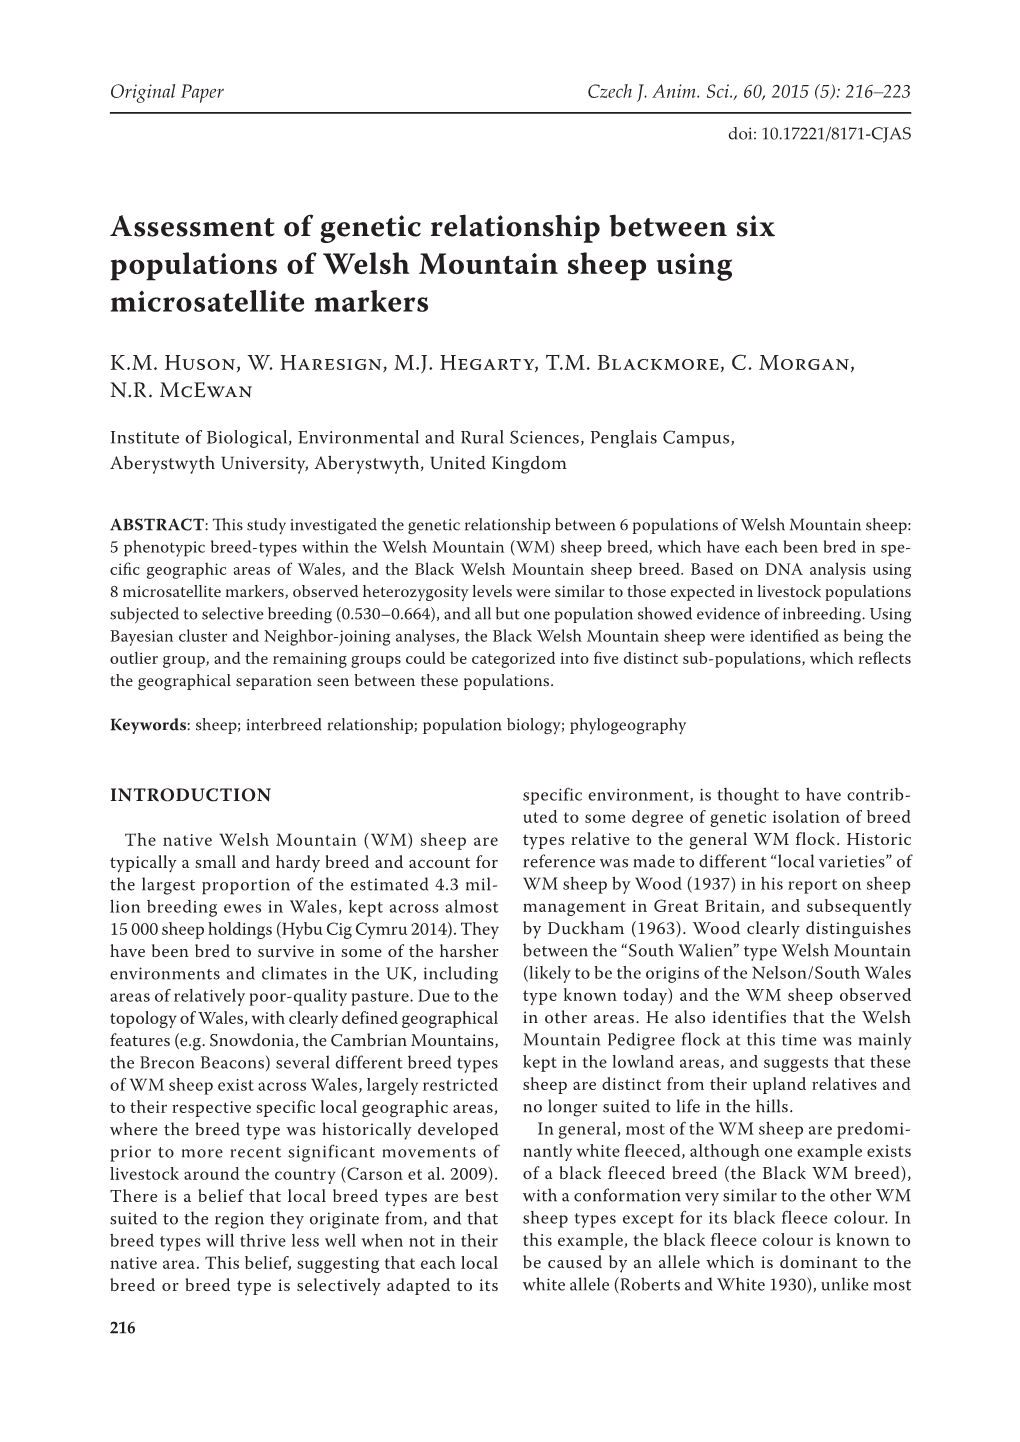 Assessment of Genetic Relationship Between Six Populations of Welsh Mountain Sheep Using Microsatellite Markers